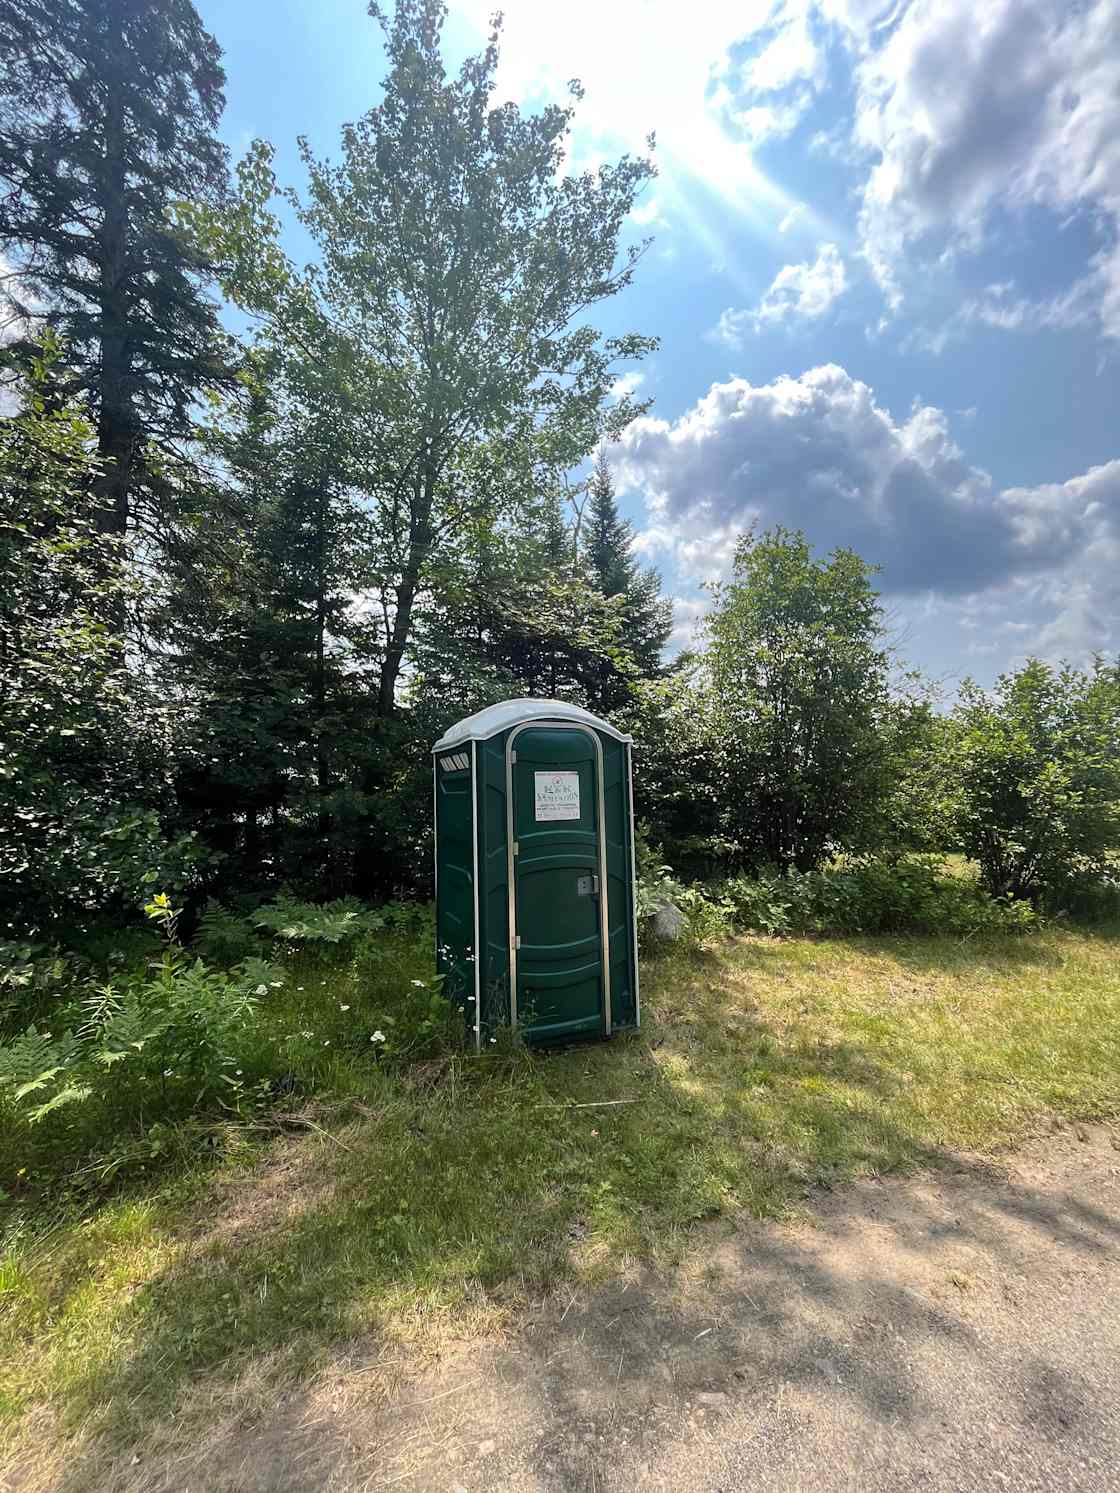 Portable toilet available for campers. Serviced and cleaned weekly.